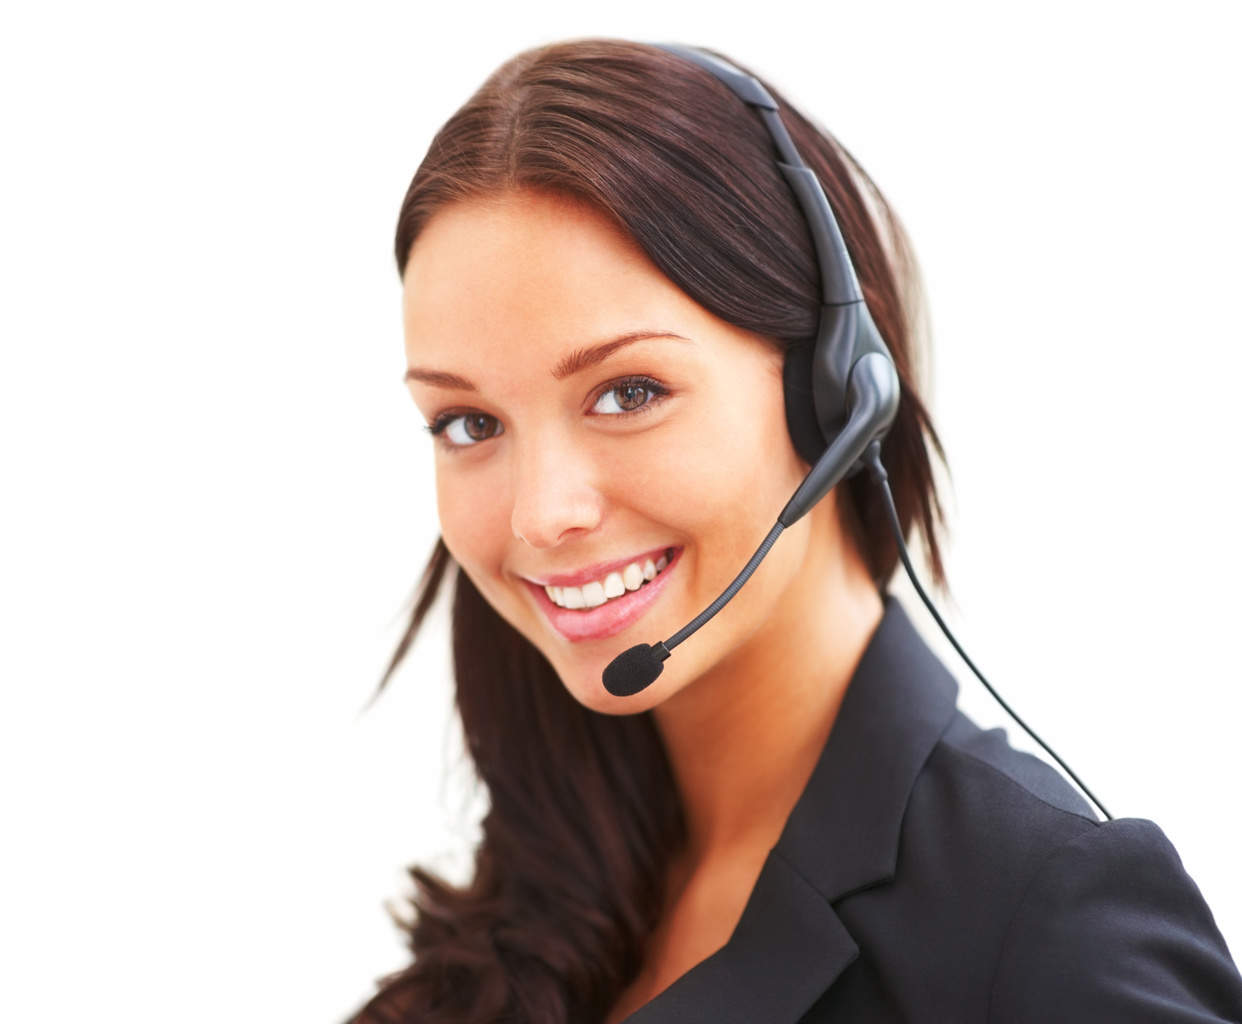 How Does Quality Customer Service Impact Your Business?